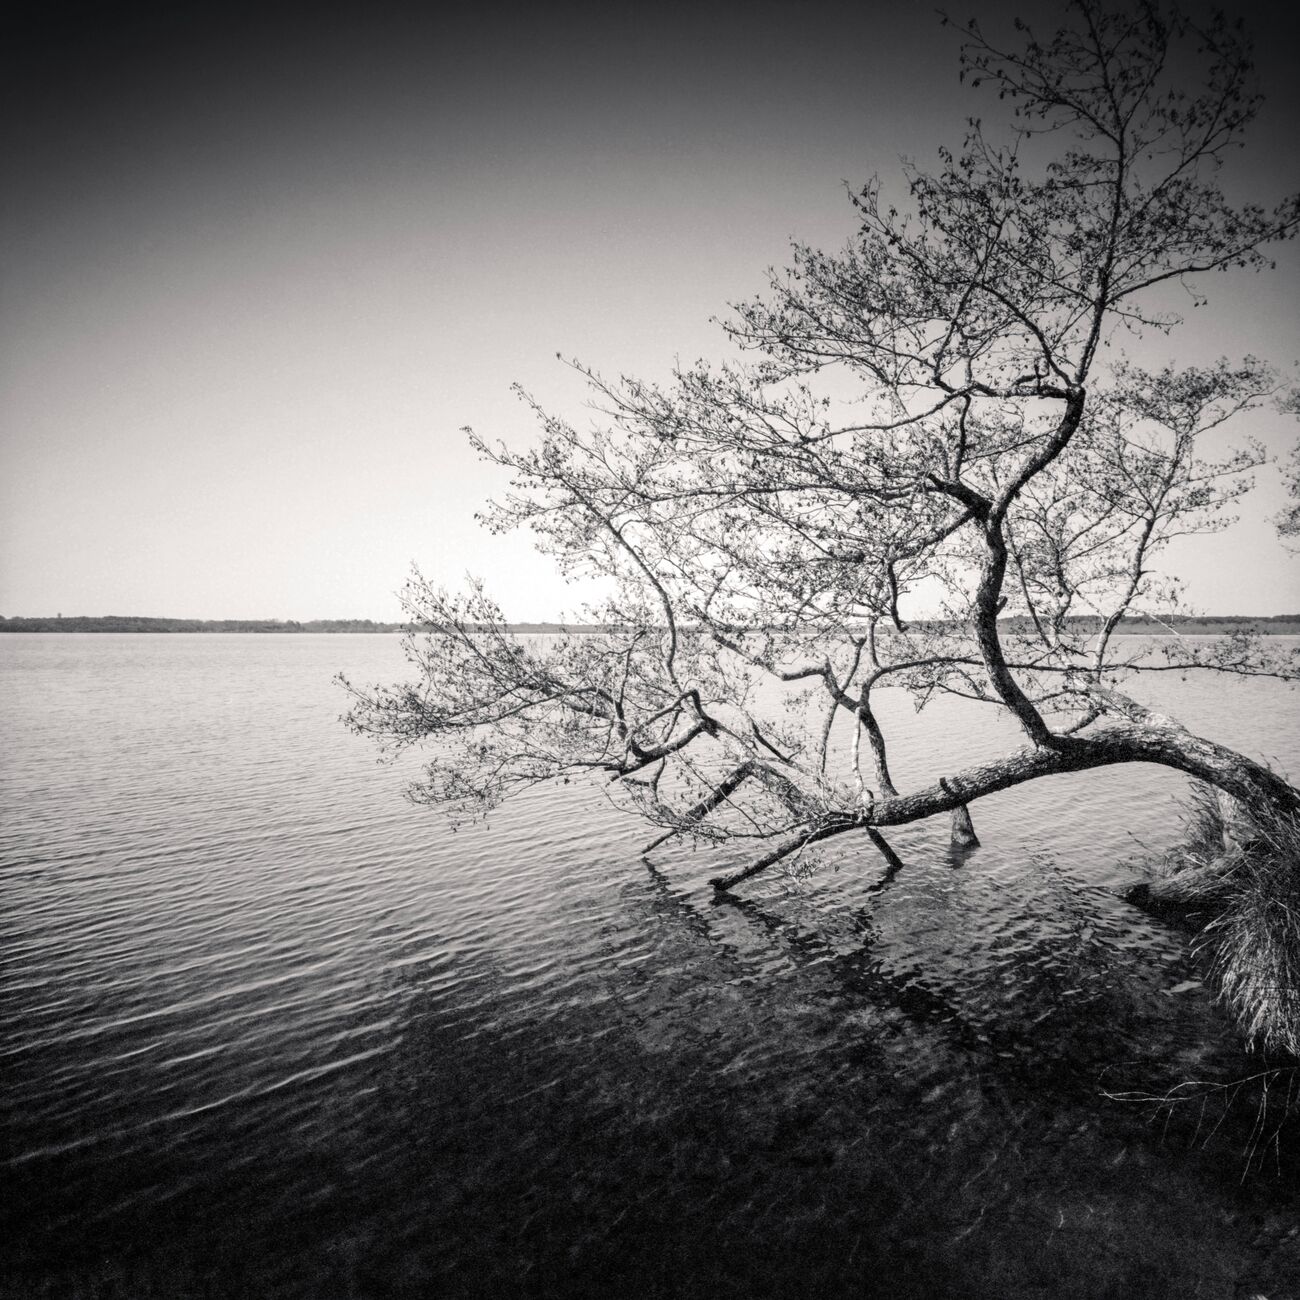 Tree In Water, Study 1, Azur Lake, France. March 2021. Ref-1413 - Denis Olivier Photography